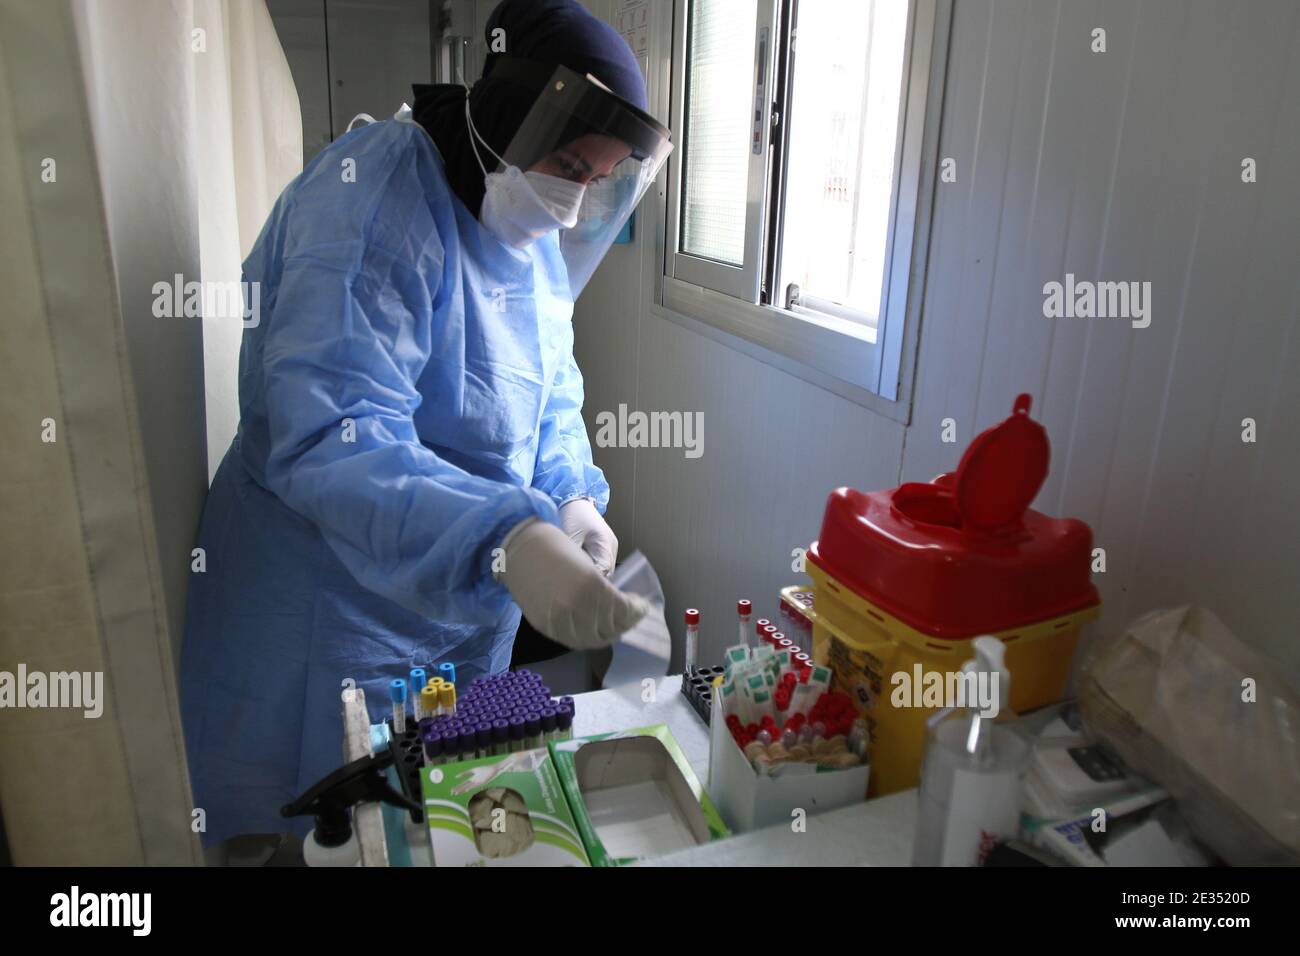 Tripoli, Lebanon. 16th Jan, 2021. A nurse prepares for a COVID-19 test at a hospital in Tripoli, Lebanon, Jan. 16, 2021. Lebanon registered on Saturday 5,872 new COVID-19 infections, bringing the total number of cases in the country to 249,158. Credit: Khaled/Xinhua/Alamy Live News Stock Photo